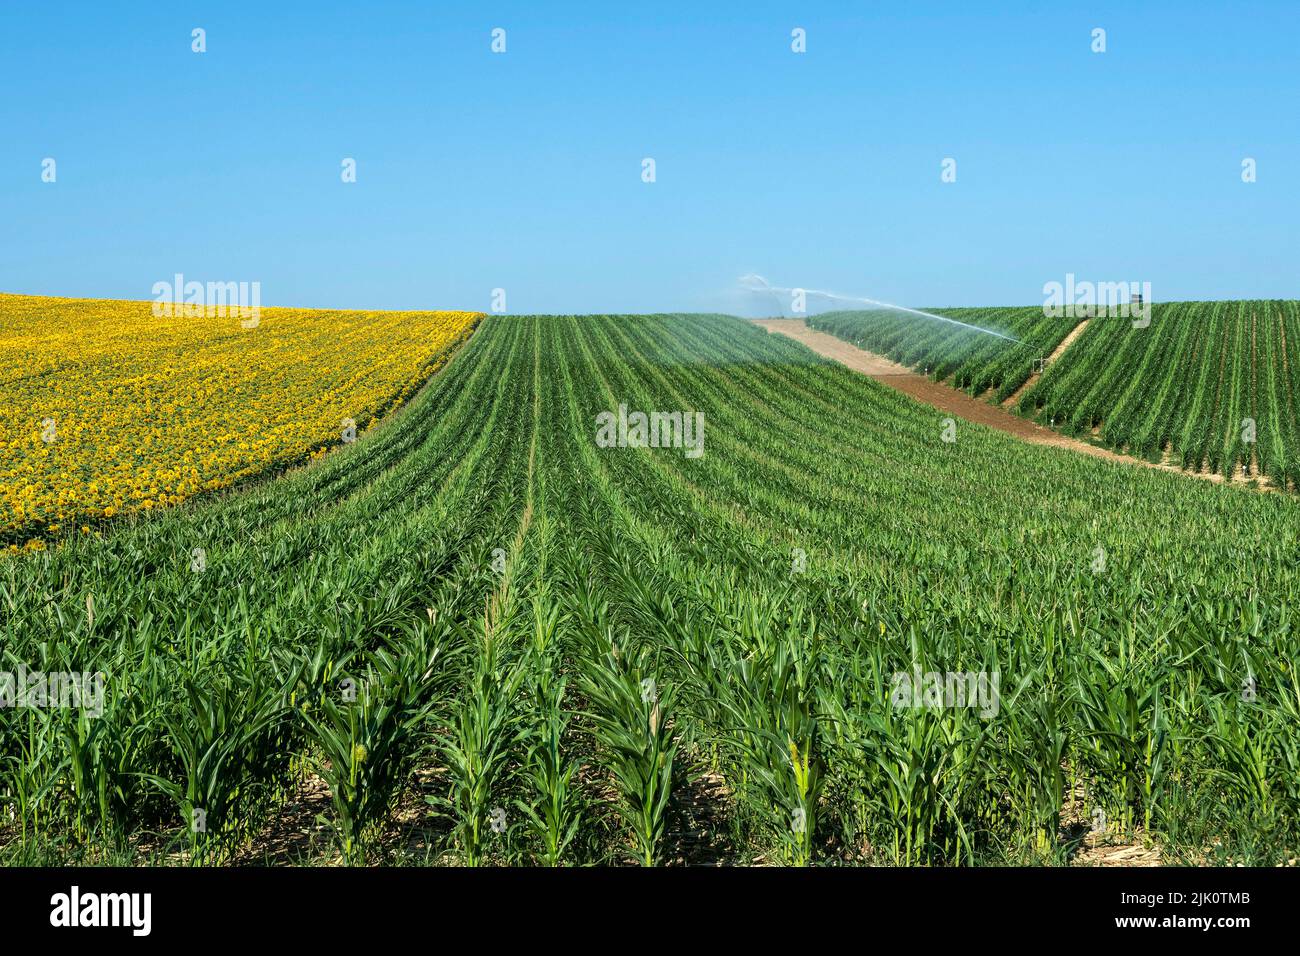 View of Watering system watering huge field of maize under blue sky Auvergne Rhone Alpes. France Stock Photo